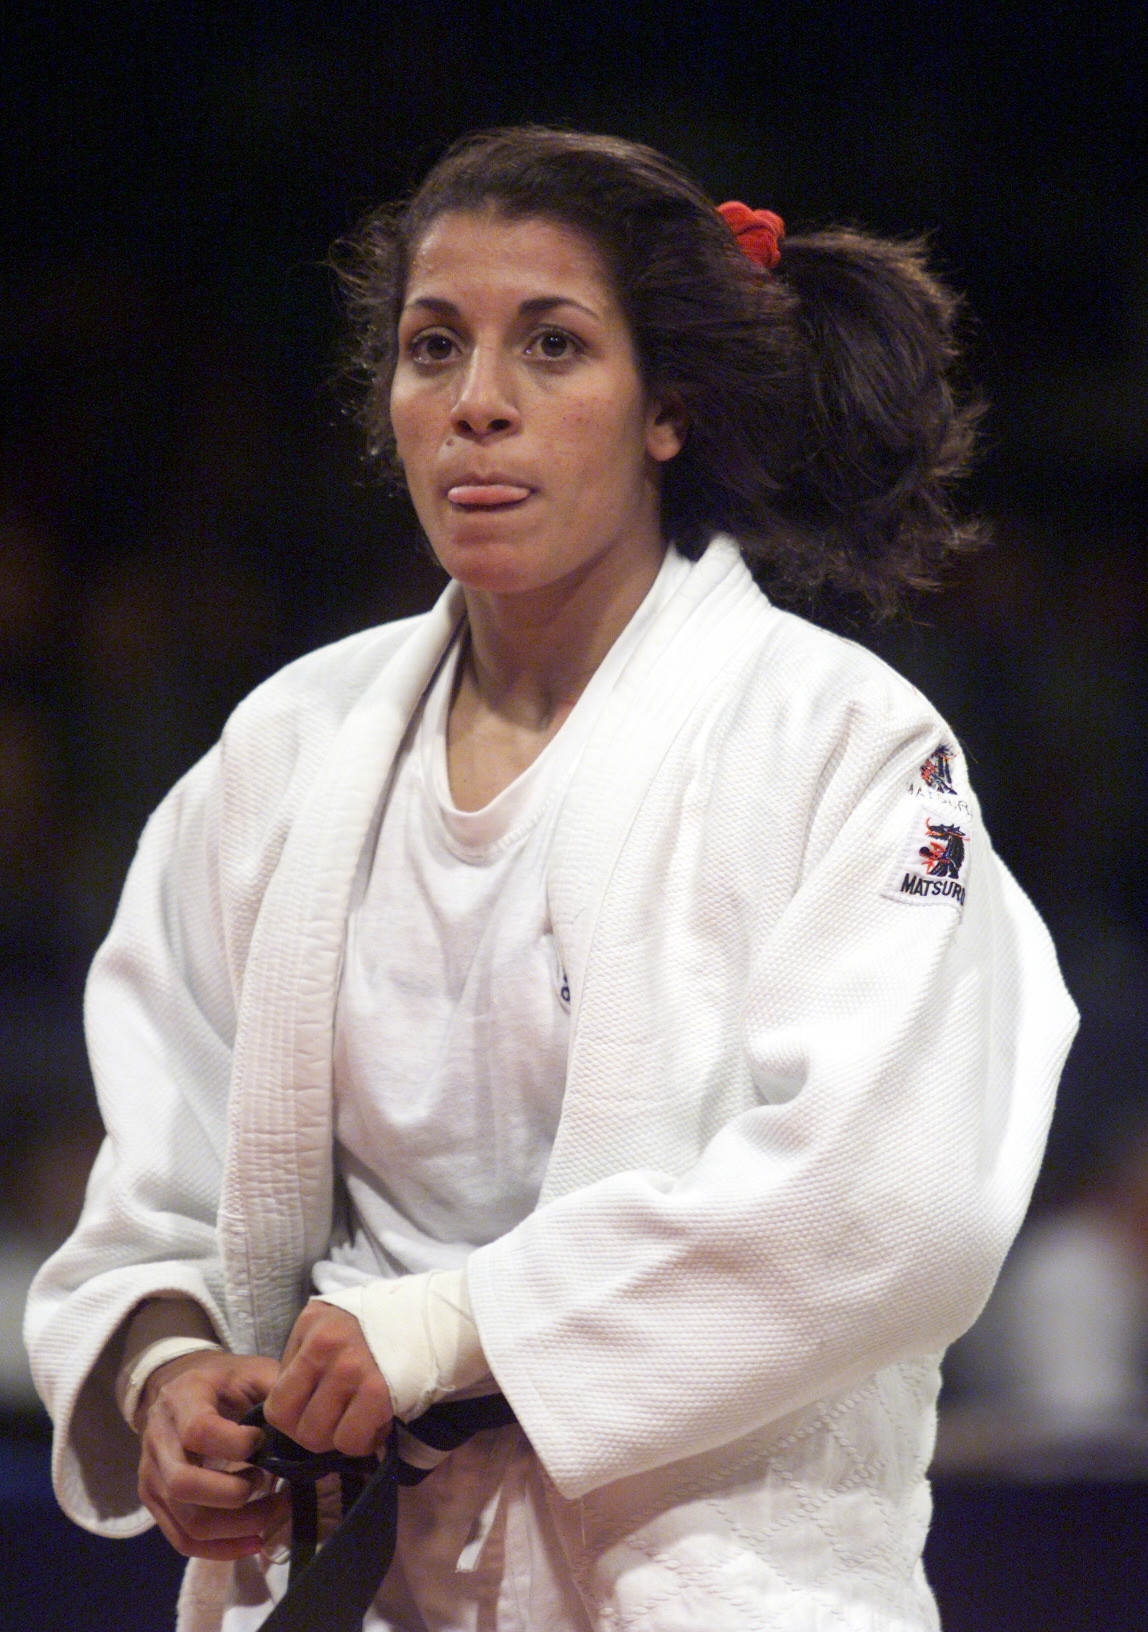 Salima Souakri competed at four Olympic Games ©Getty Images